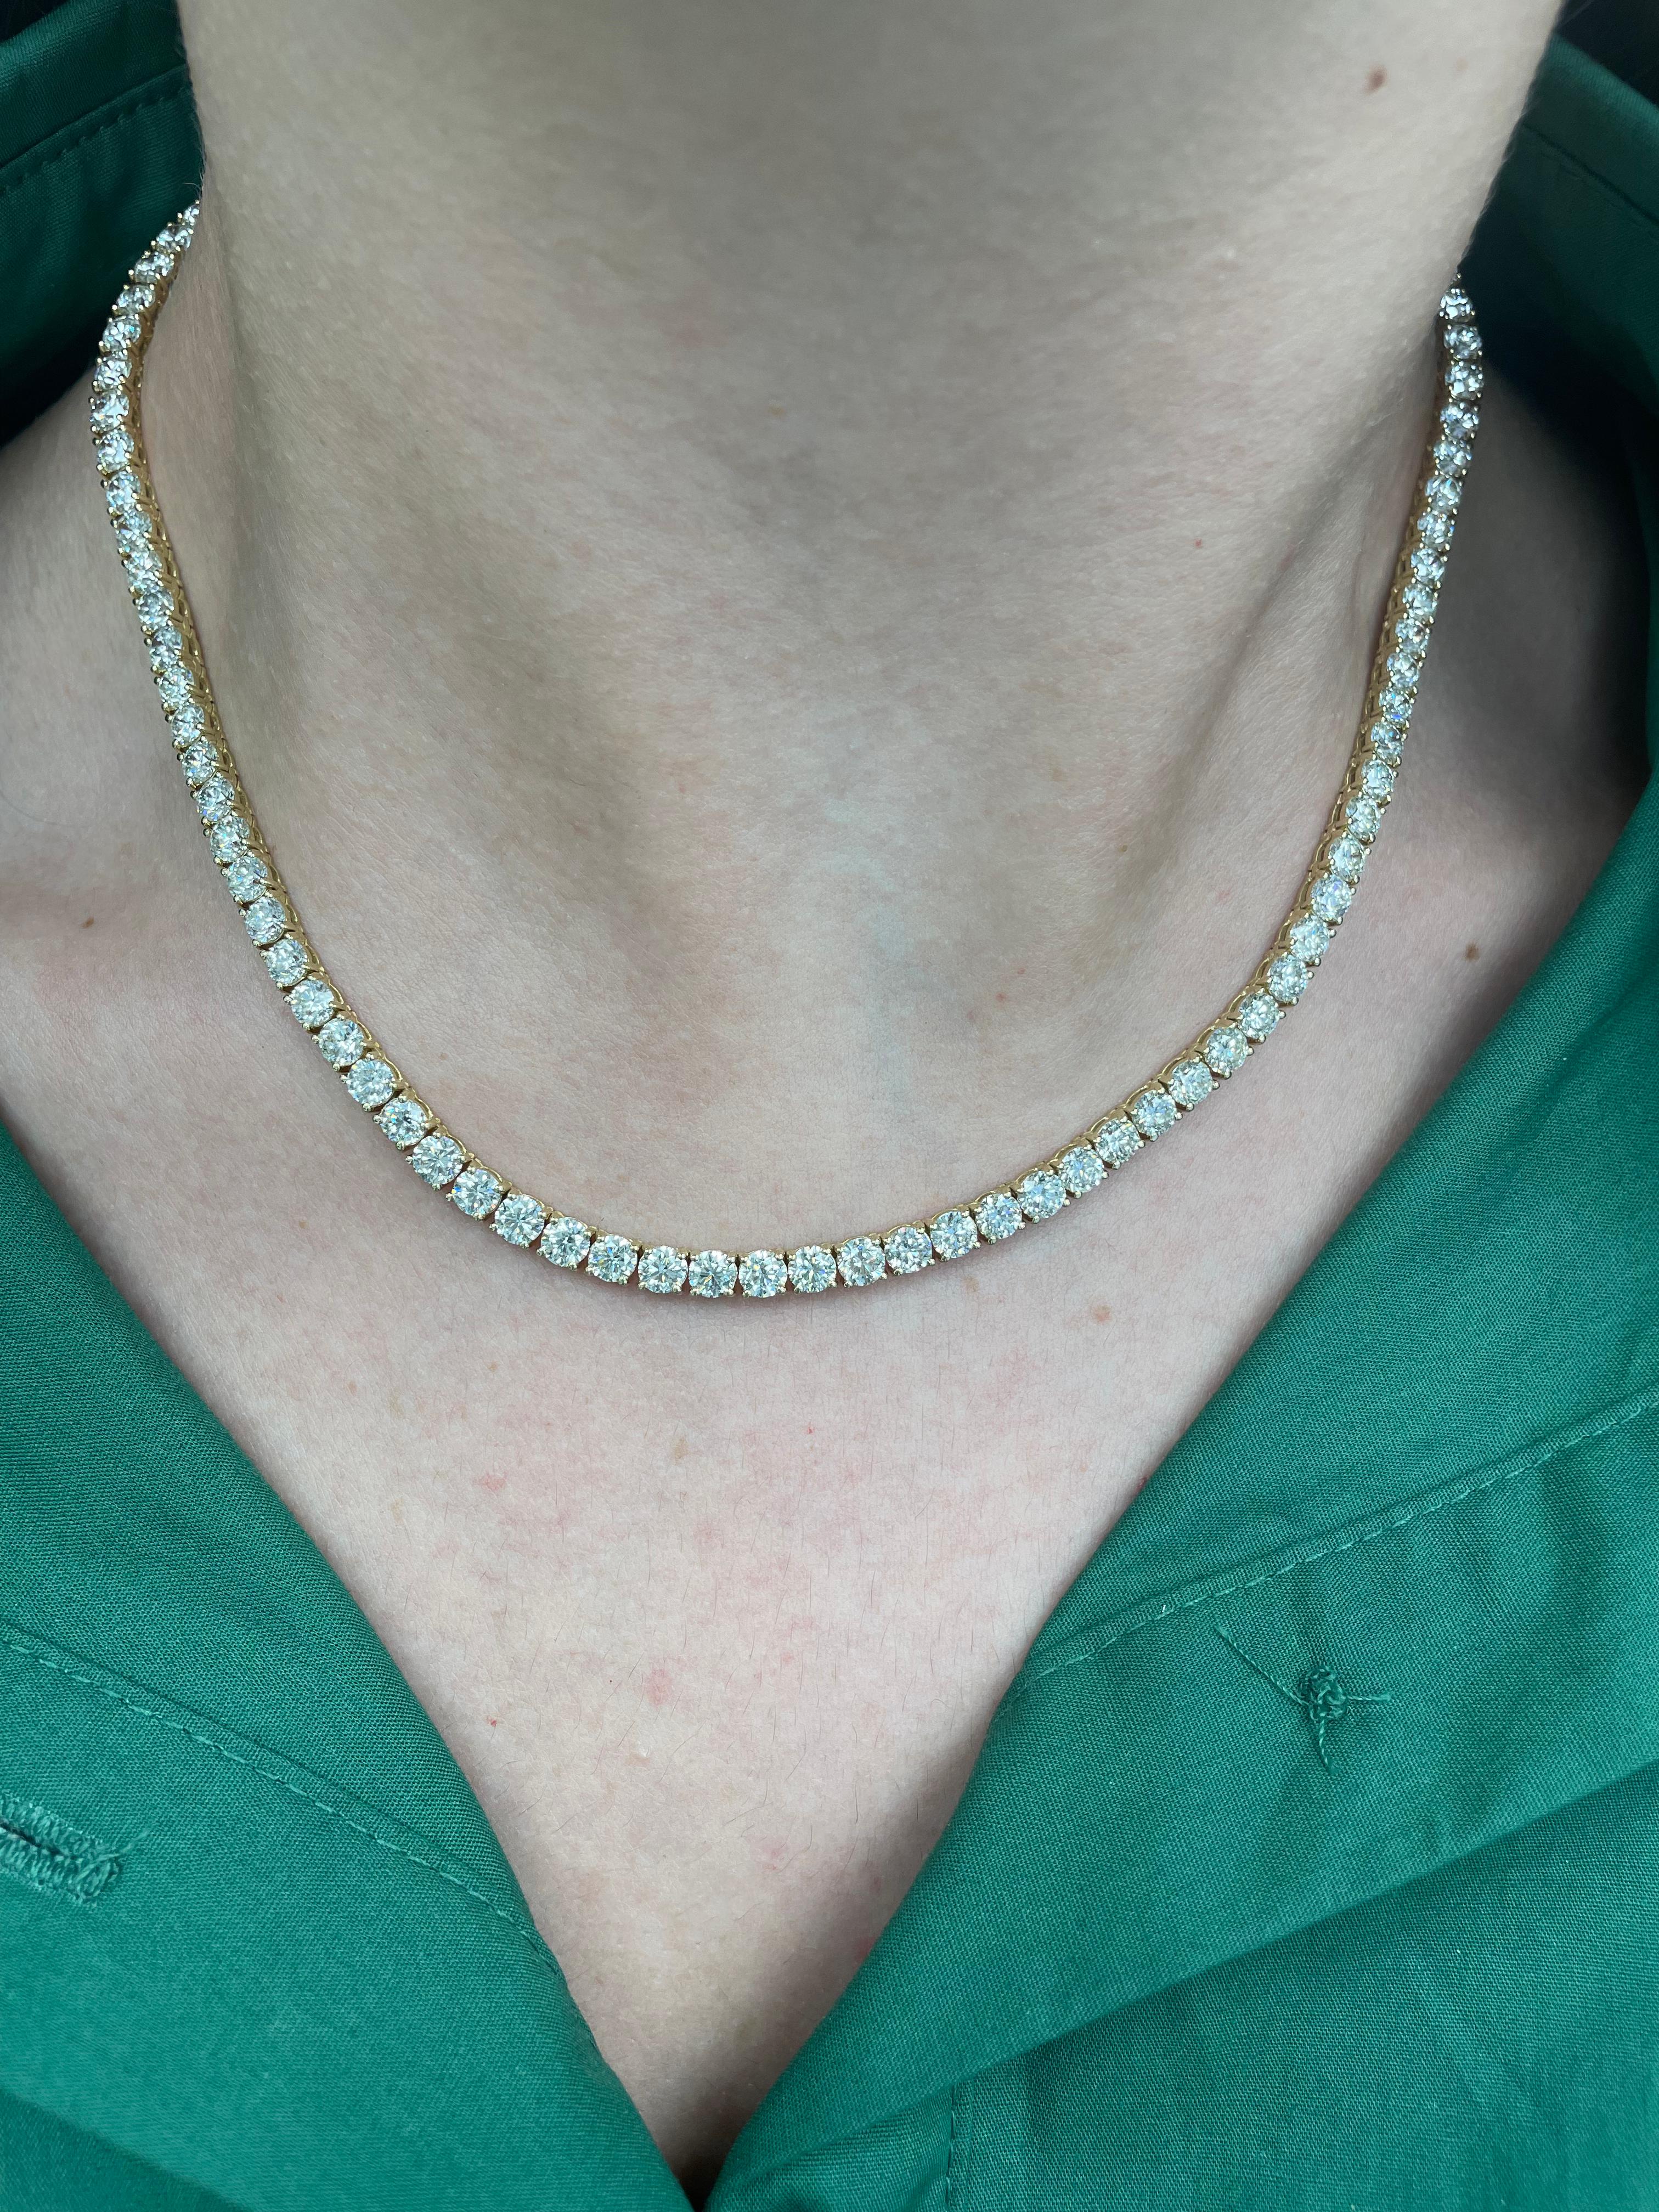 Beautiful modern diamond tennis necklace. Created by Alexander Beverly Hills.
100 round brilliant diamonds, 24.56 carats. Approximately H/I color and VS clarity. 18k yellow gold, 26.19 grams, 16.5in.
Accommodated with an up to date appraisal by a